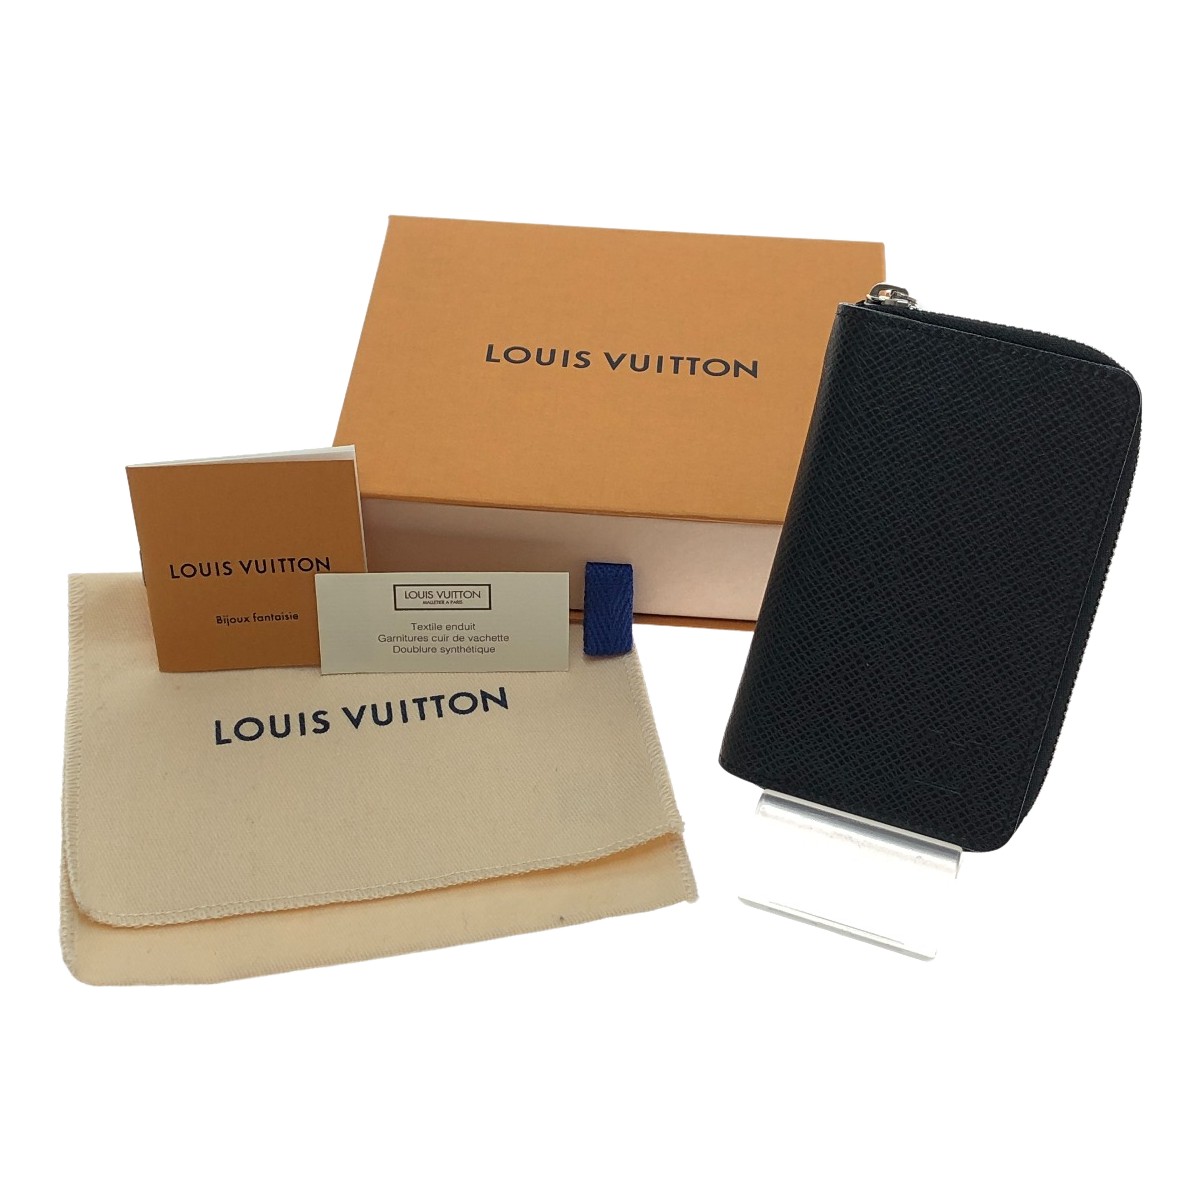 □□LOUIS VUITTON ルイヴィトン タイガ ジッピーコインパース